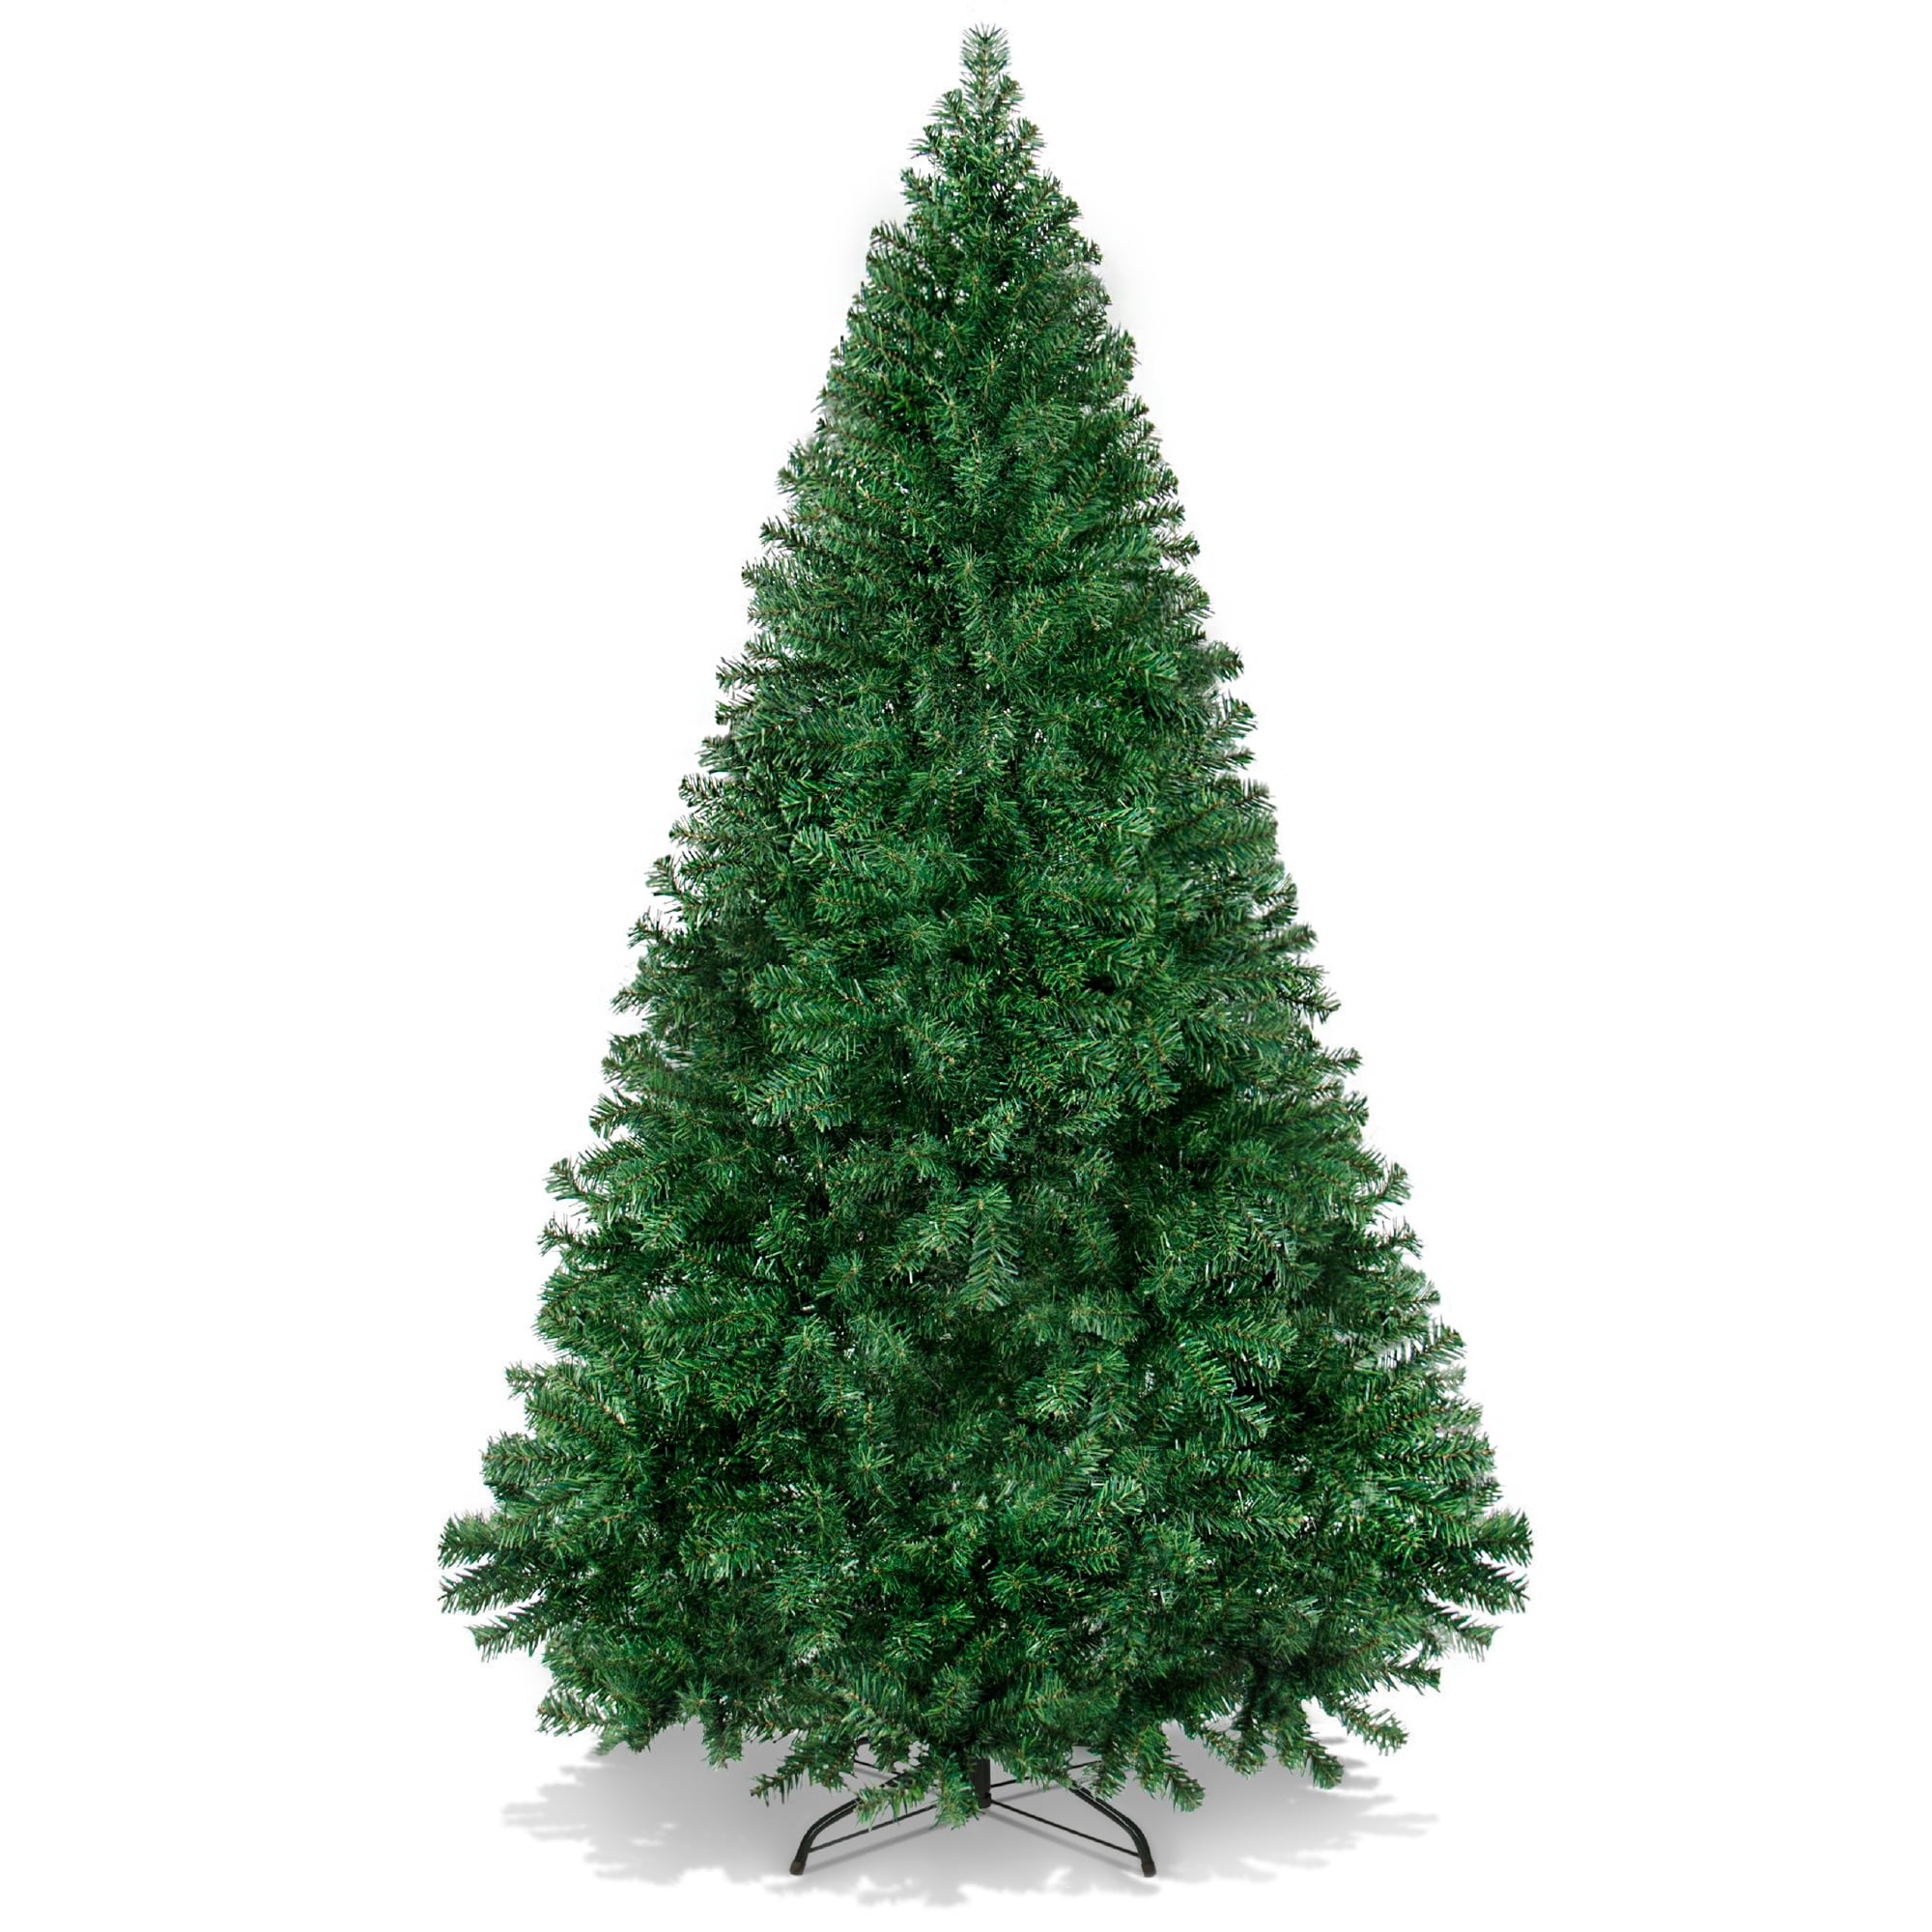 Details about   6 ft Premium Hinged Artificial Christmas Tree Snowy Pine Needles 586 Branches 